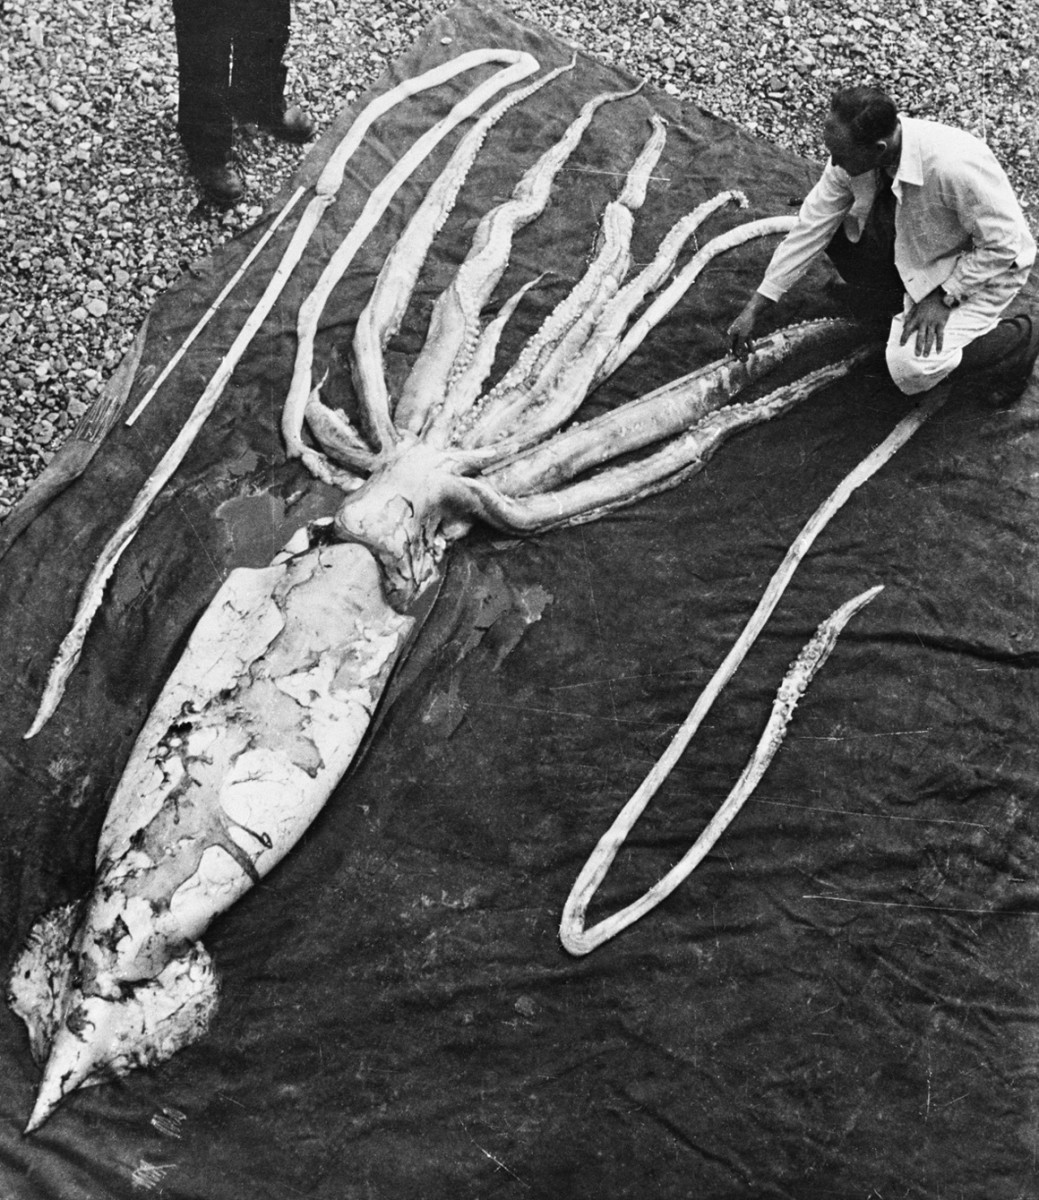 A giant squid washed ashore in Norway in 1954. It measured 9.2 meters in length.